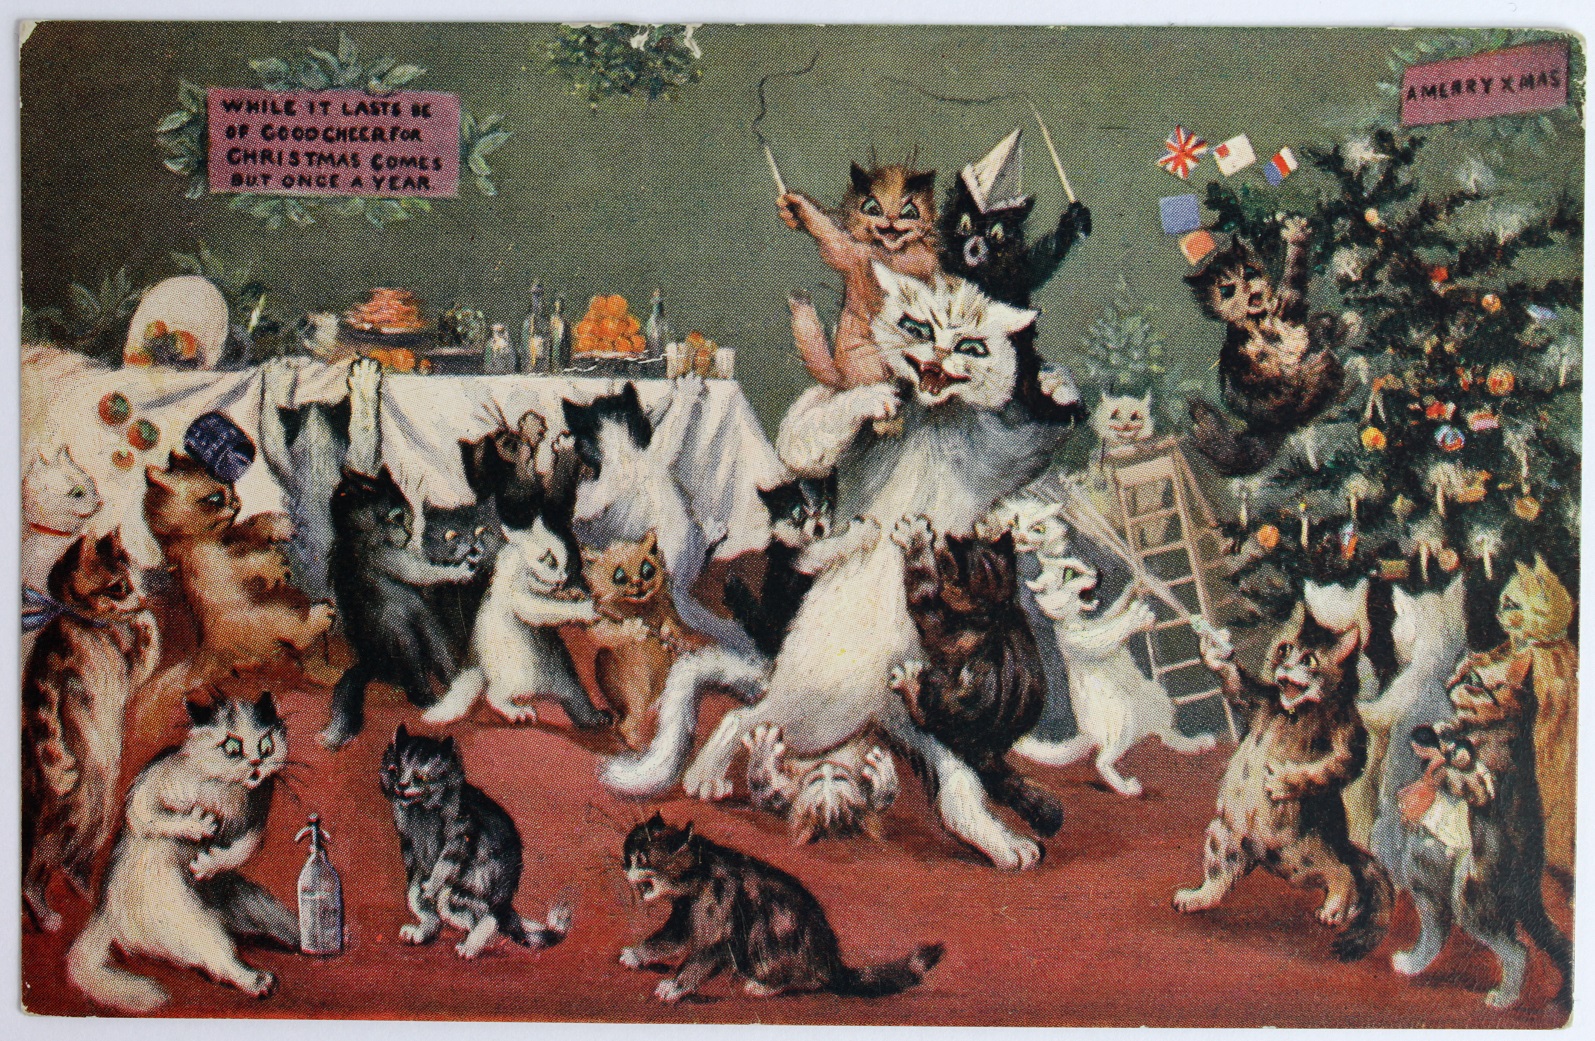 Louis Wain cats postcard - Raphael Tuck: "Louis Wain's Cats" series: While it lasts be of good cheer